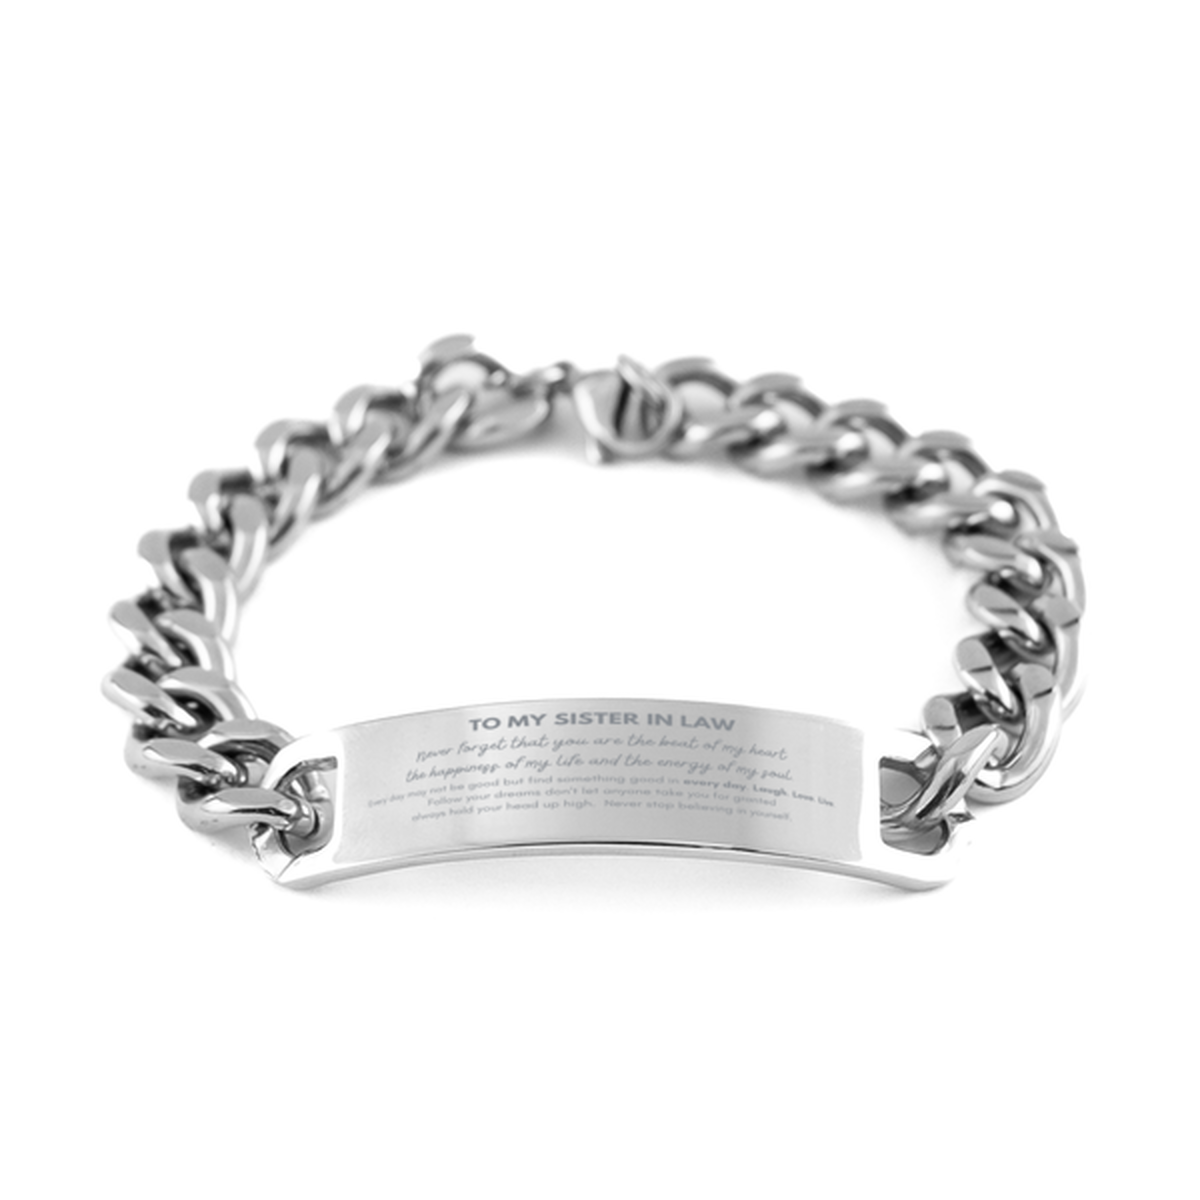 To My Sister In Law Bracelet Gifts, Christmas Sister In Law Cuban Chain Stainless Steel Bracelet Present, Birthday Unique Motivational For Sister In Law, To My Sister In Law Never forget that you are the beat of my heart the happiness of my life and the e